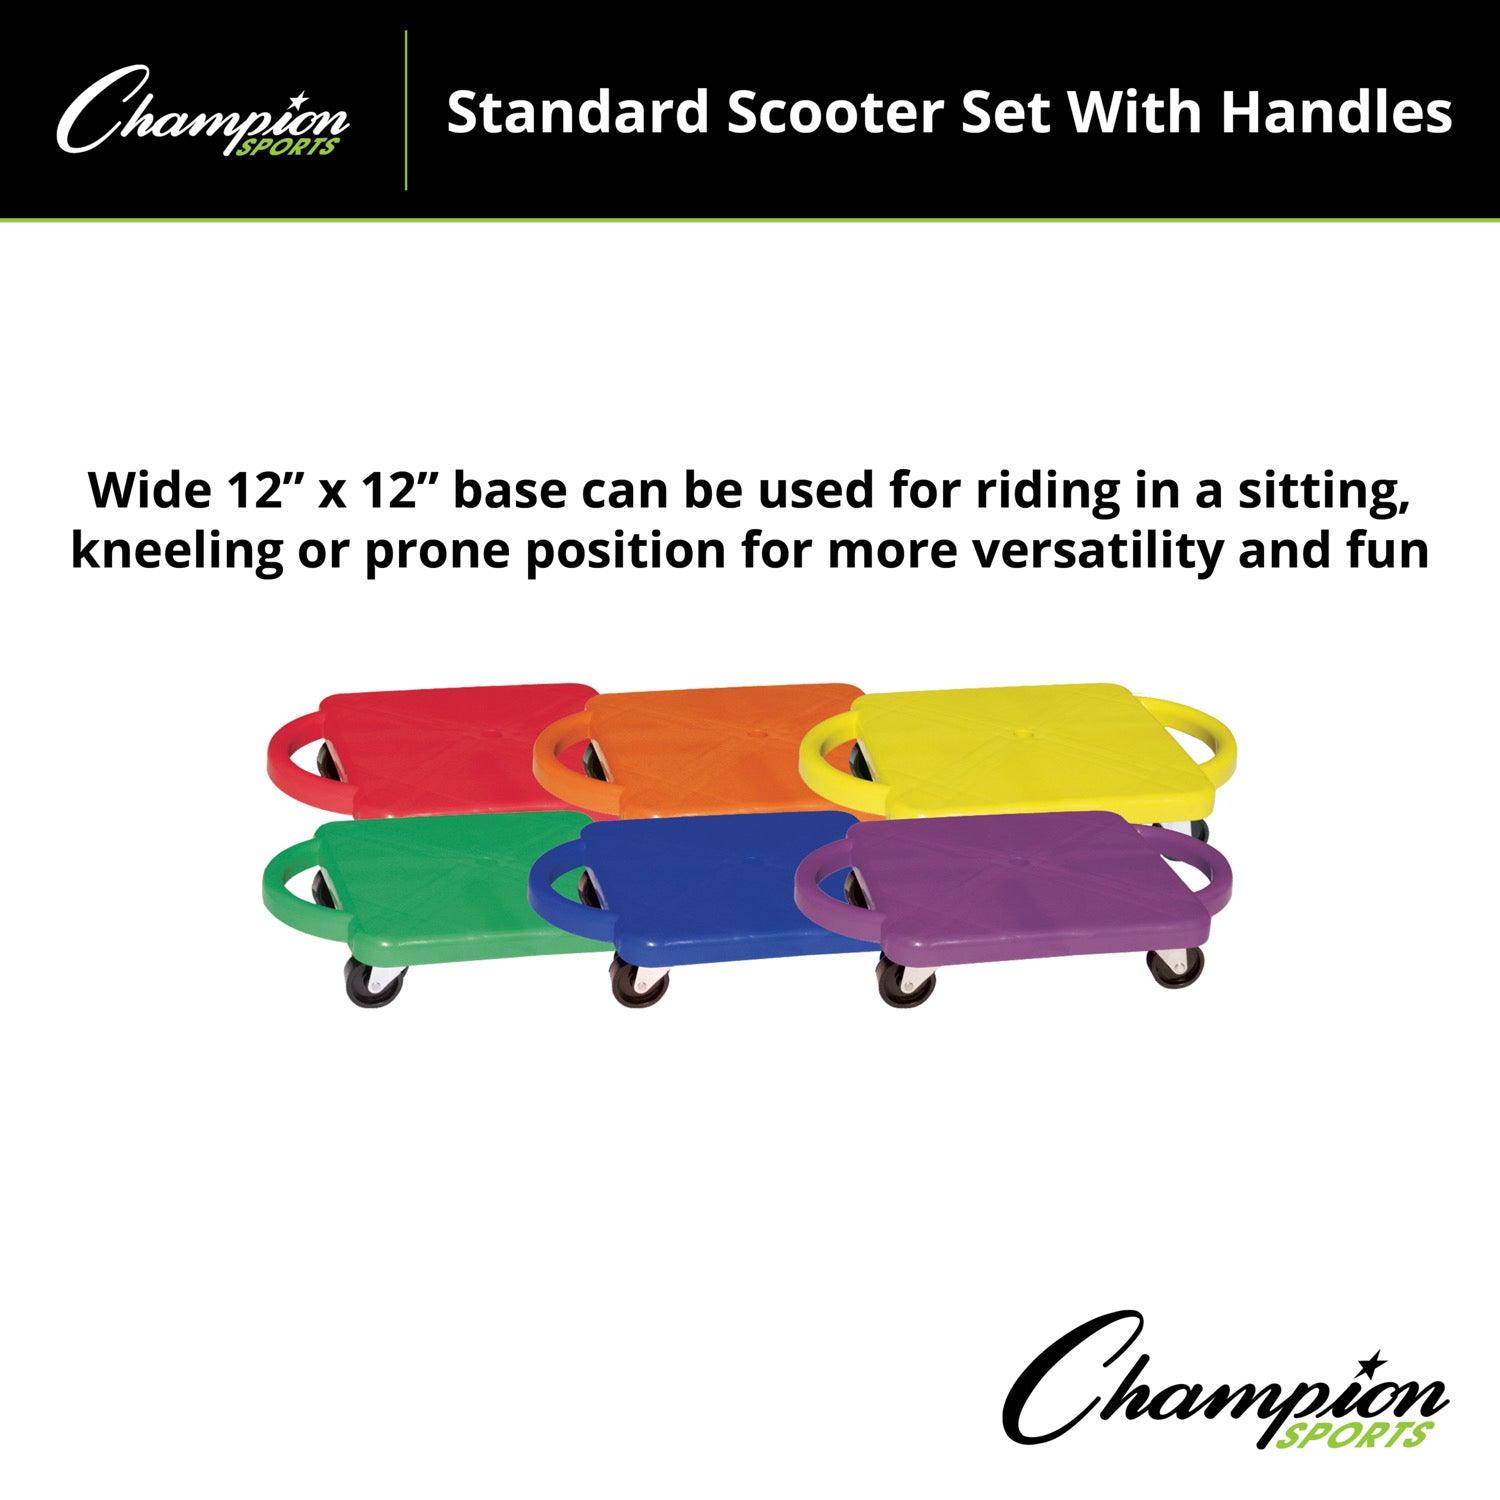 Plastic Standard Scooter Set with Handles, Set of 6 - Loomini